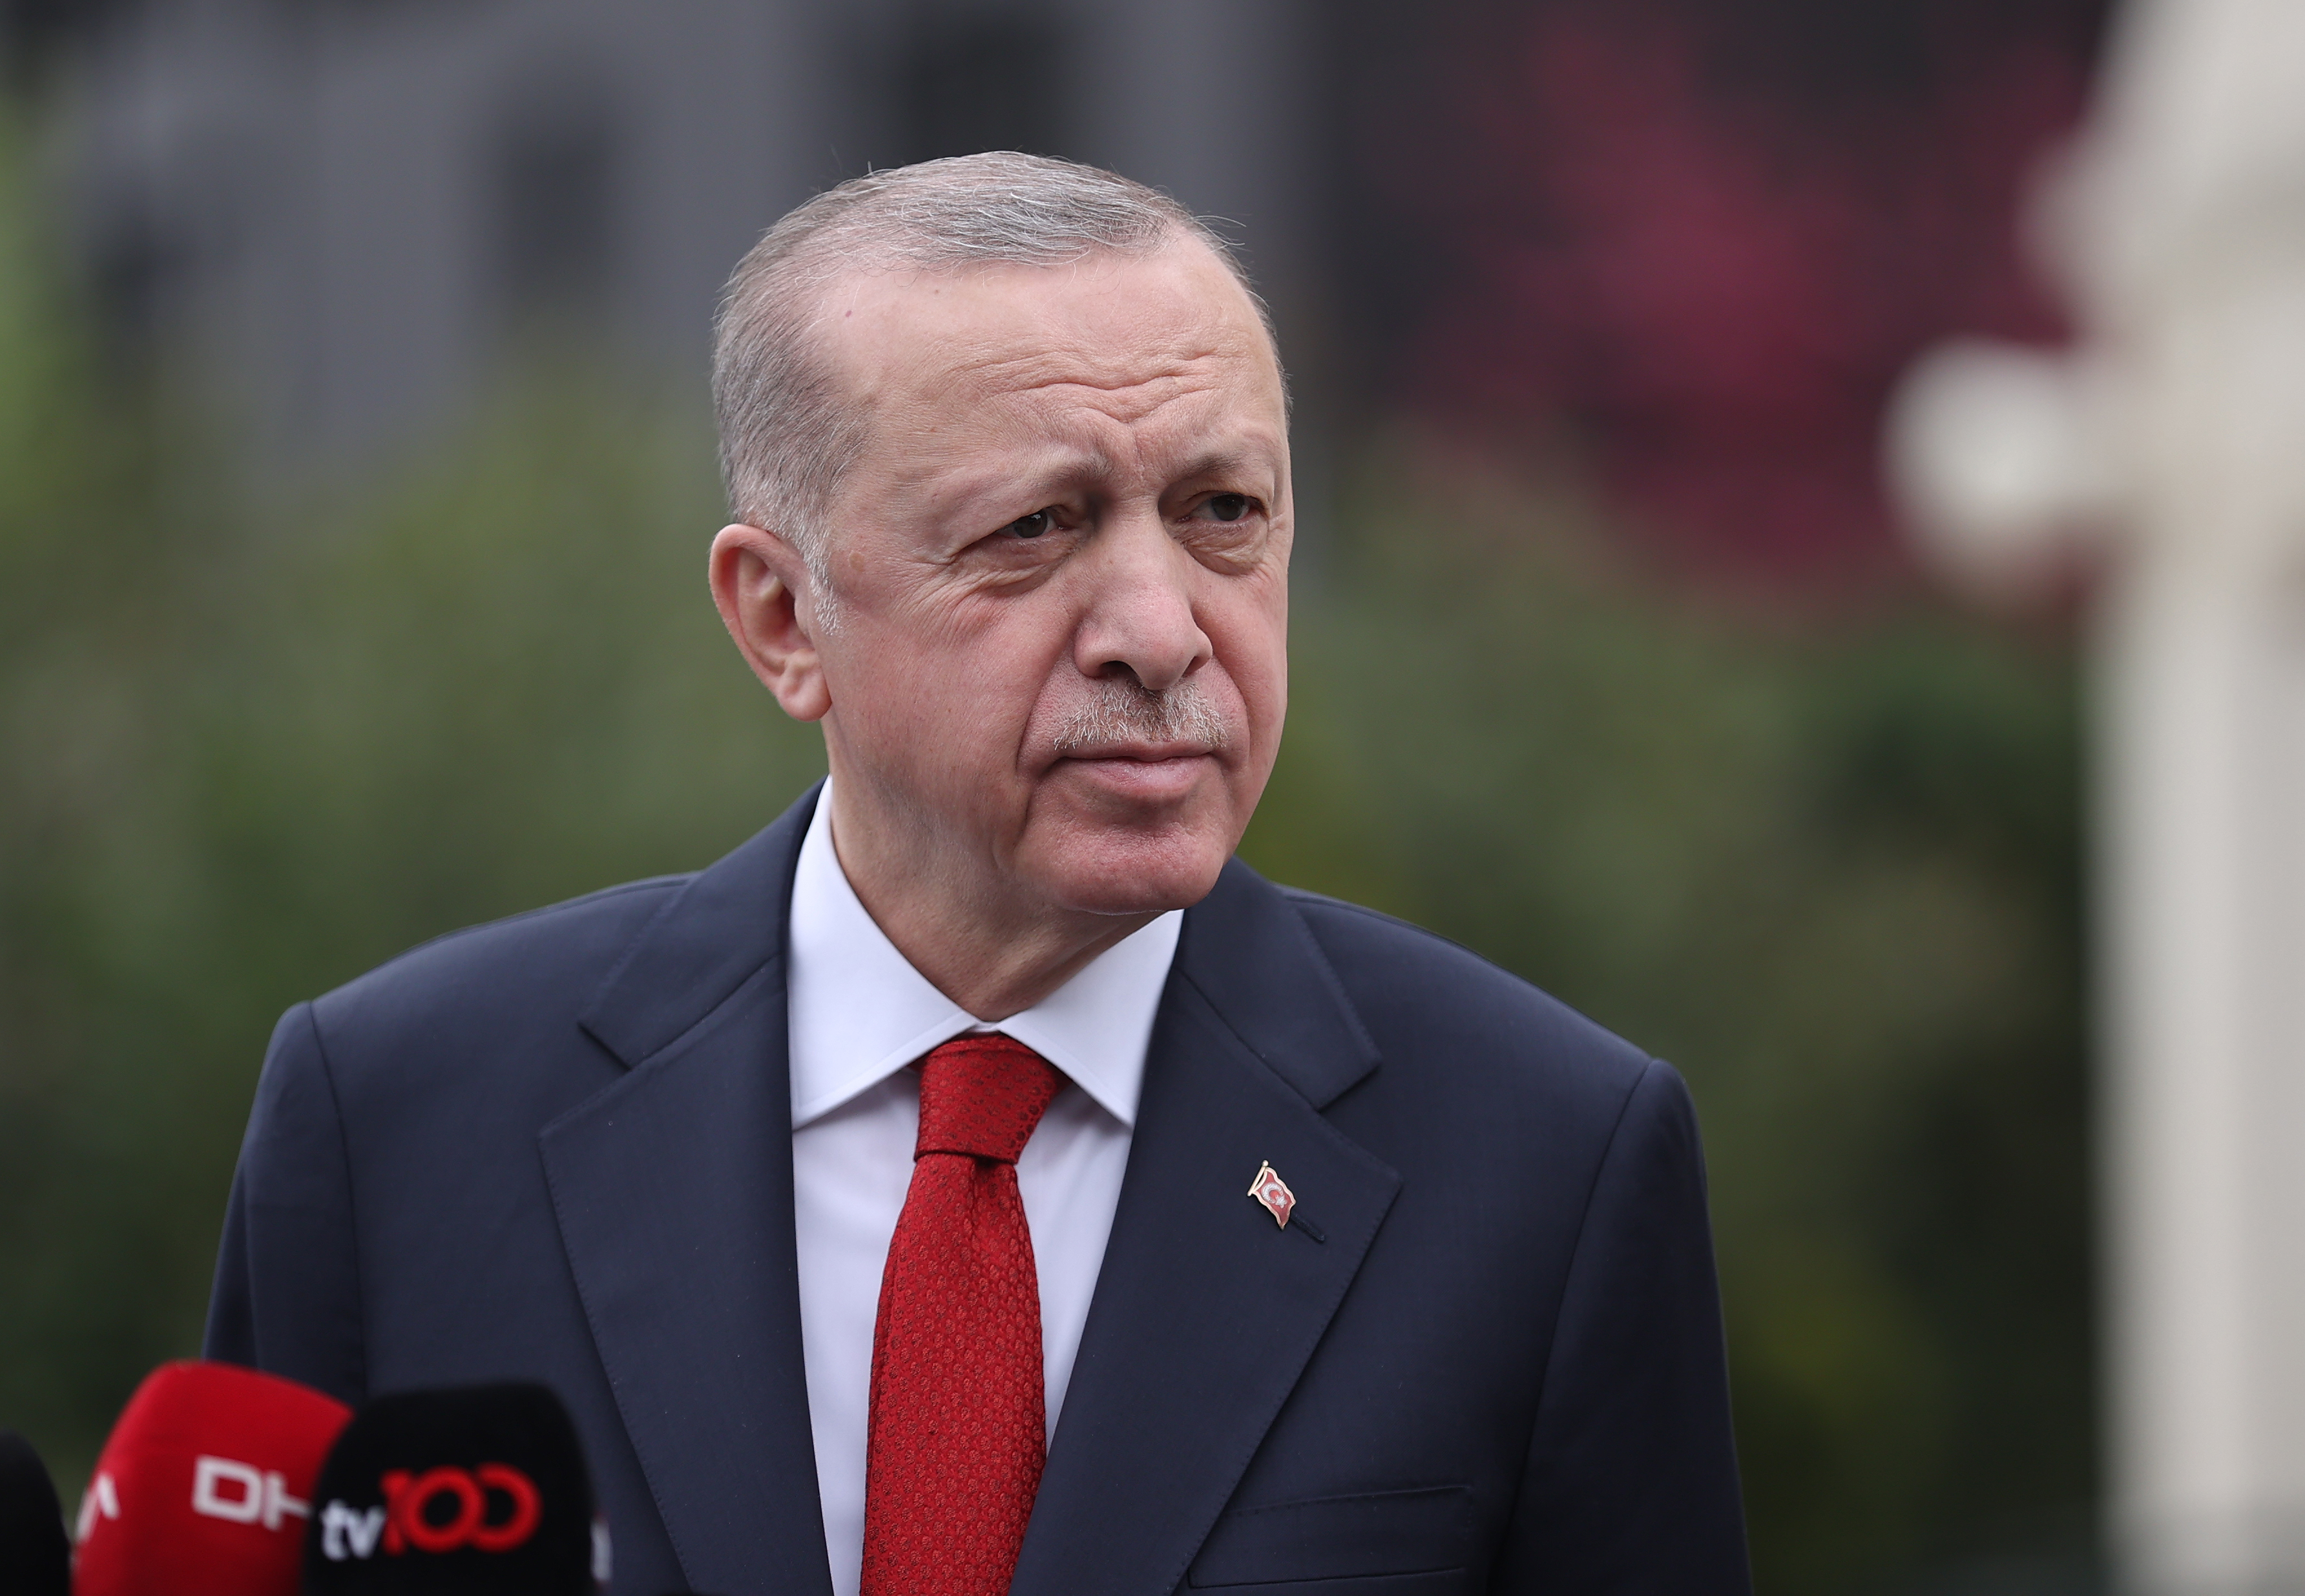 Turkish President Tayyip Erdogan speaks to the press after performing a Friday prayer at Hz. Ali Mosque in Istanbul, Turkey, on April 22, 2022.